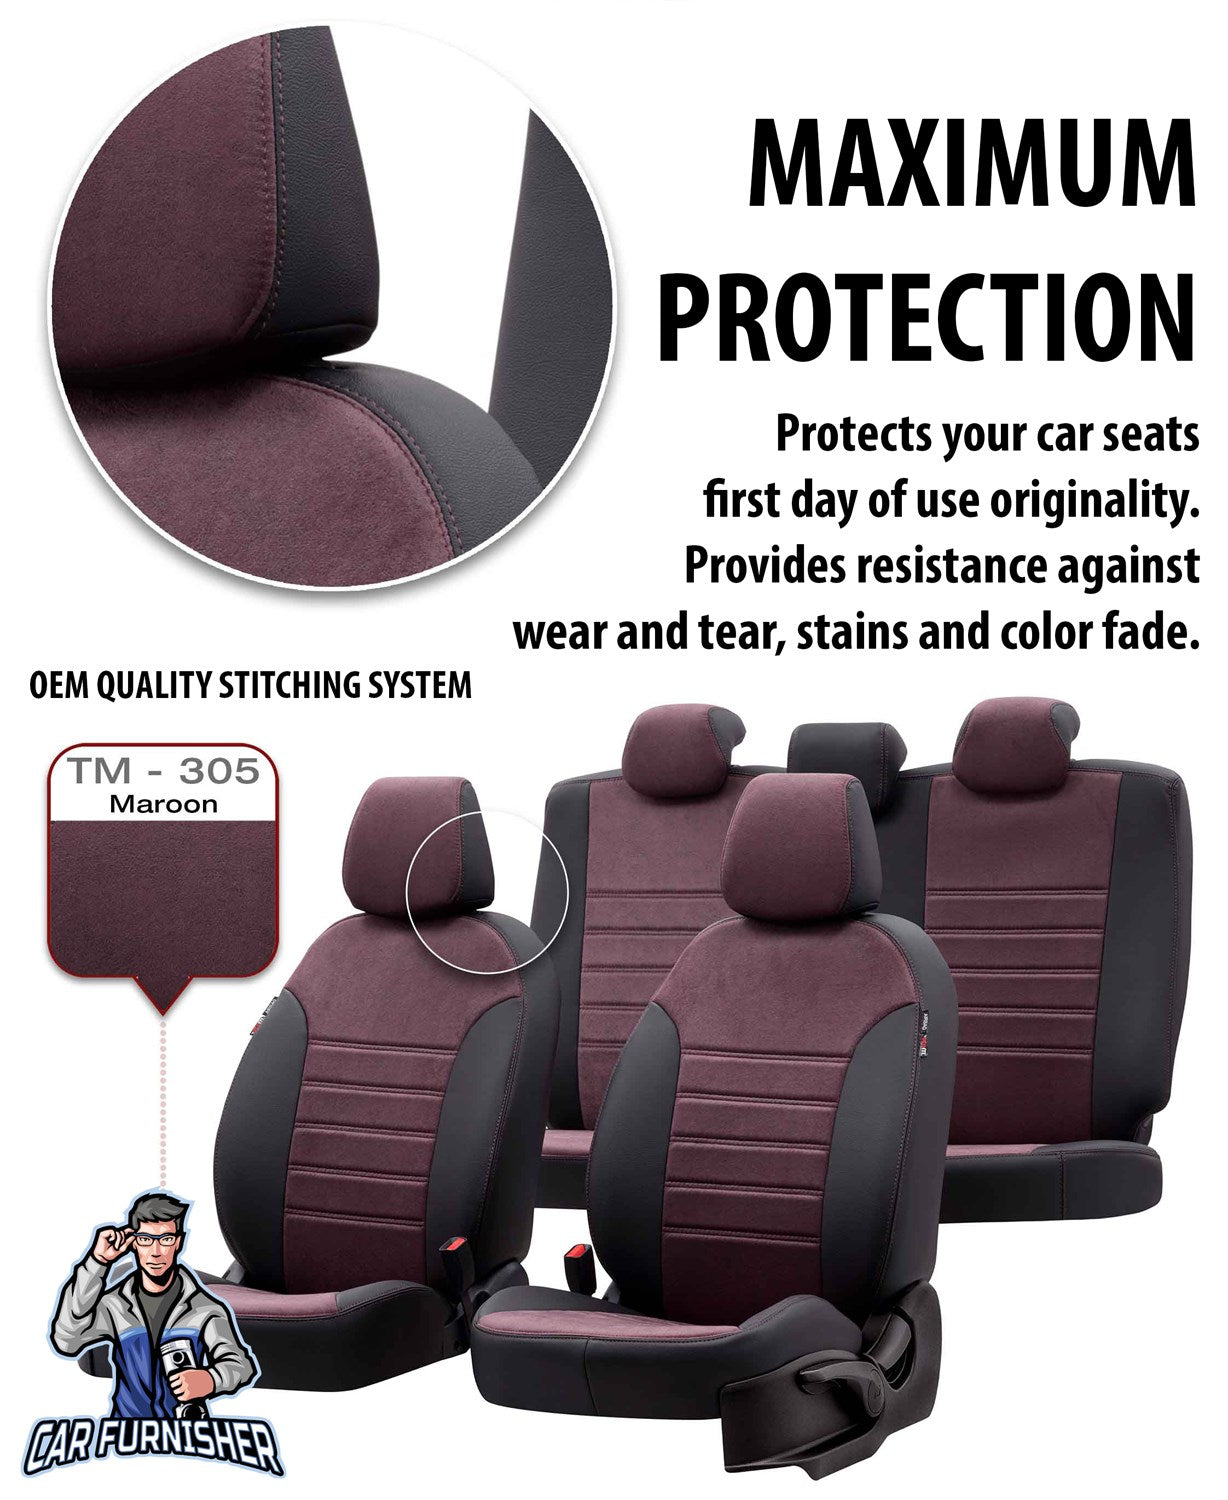 Skoda Roomstar Seat Cover Milano Suede Design Burgundy Leather & Suede Fabric